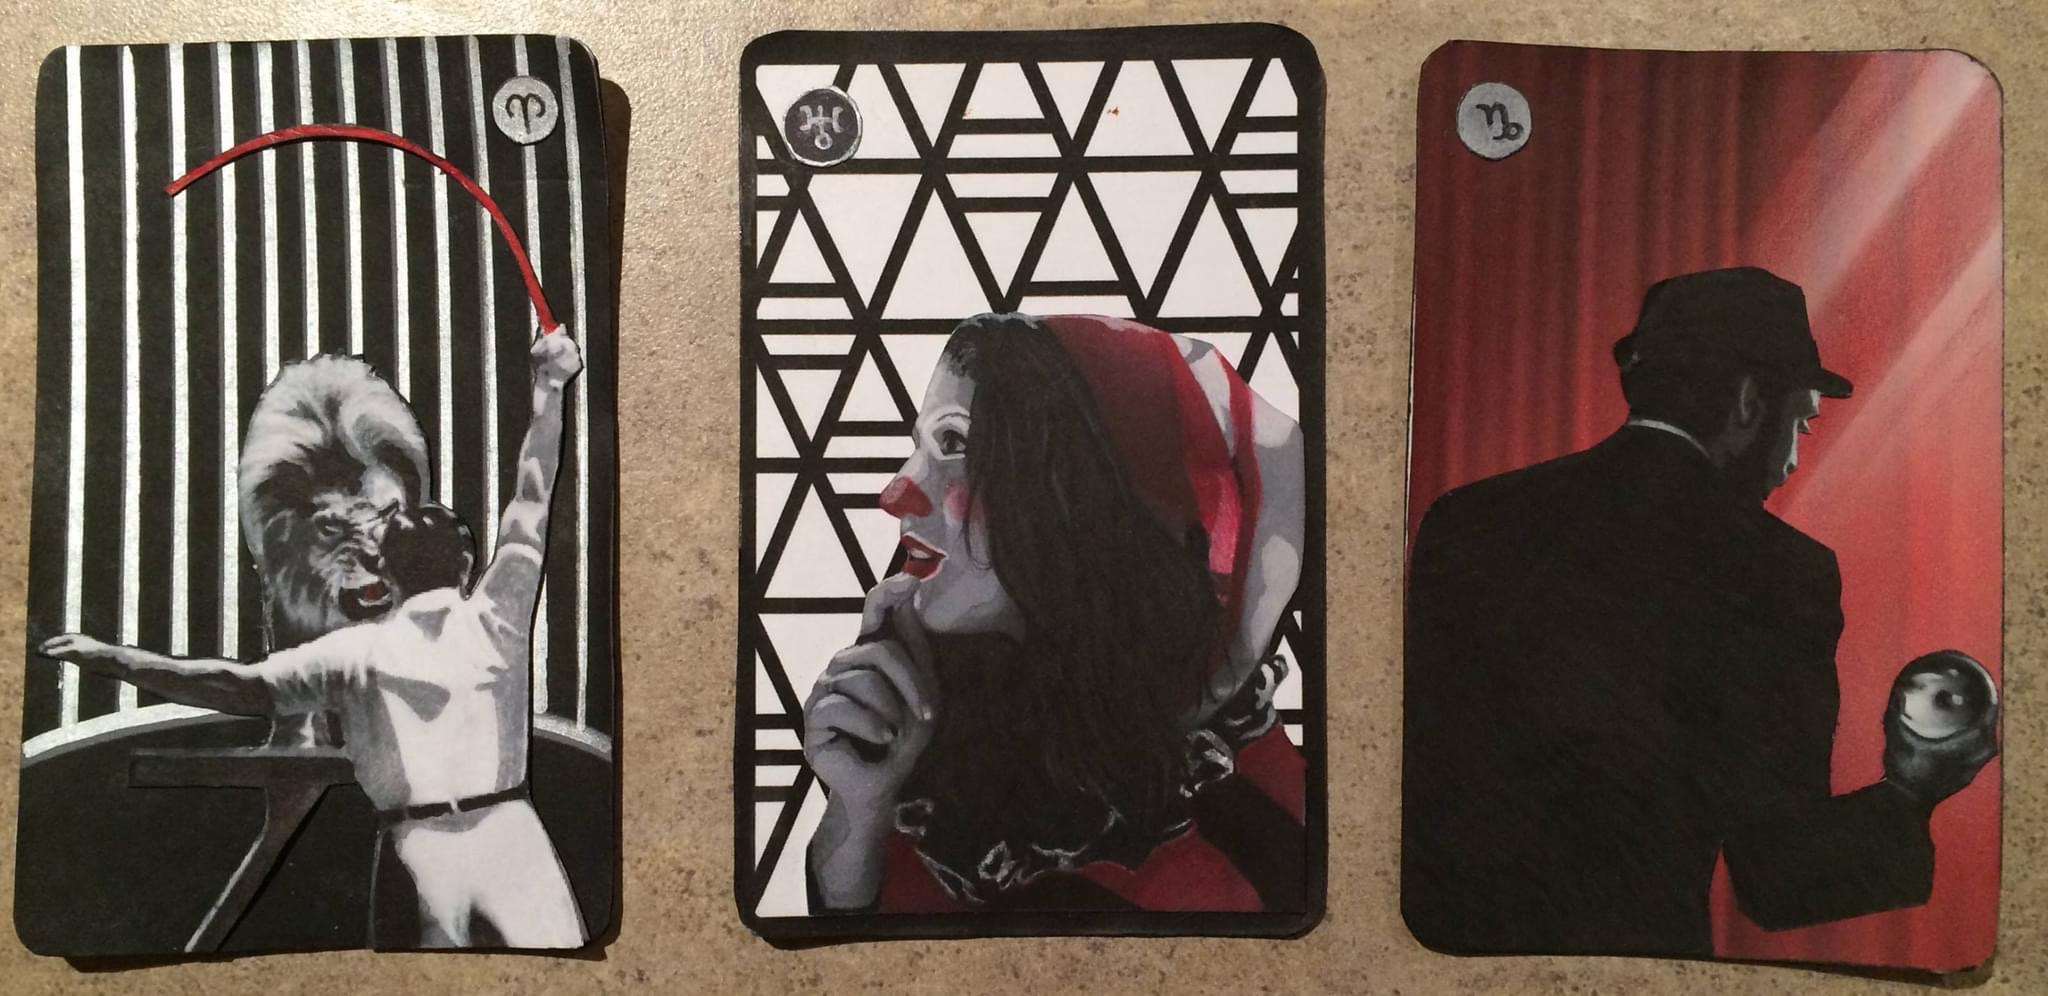 3 cards in a black white and red color scheme, the first is a lion tamer in a cage cracking a red whip at a lion on a platform, the second is a young woman clown with a hand raised thoughtfully to her lips against a triangular backdrop, the third is a man in a suit and bowler hat, his back to the viewer, holding a clear contact juggling/chrystal ball he is backlit behind him is a red curtain there are star sign symbols in the corner of each card